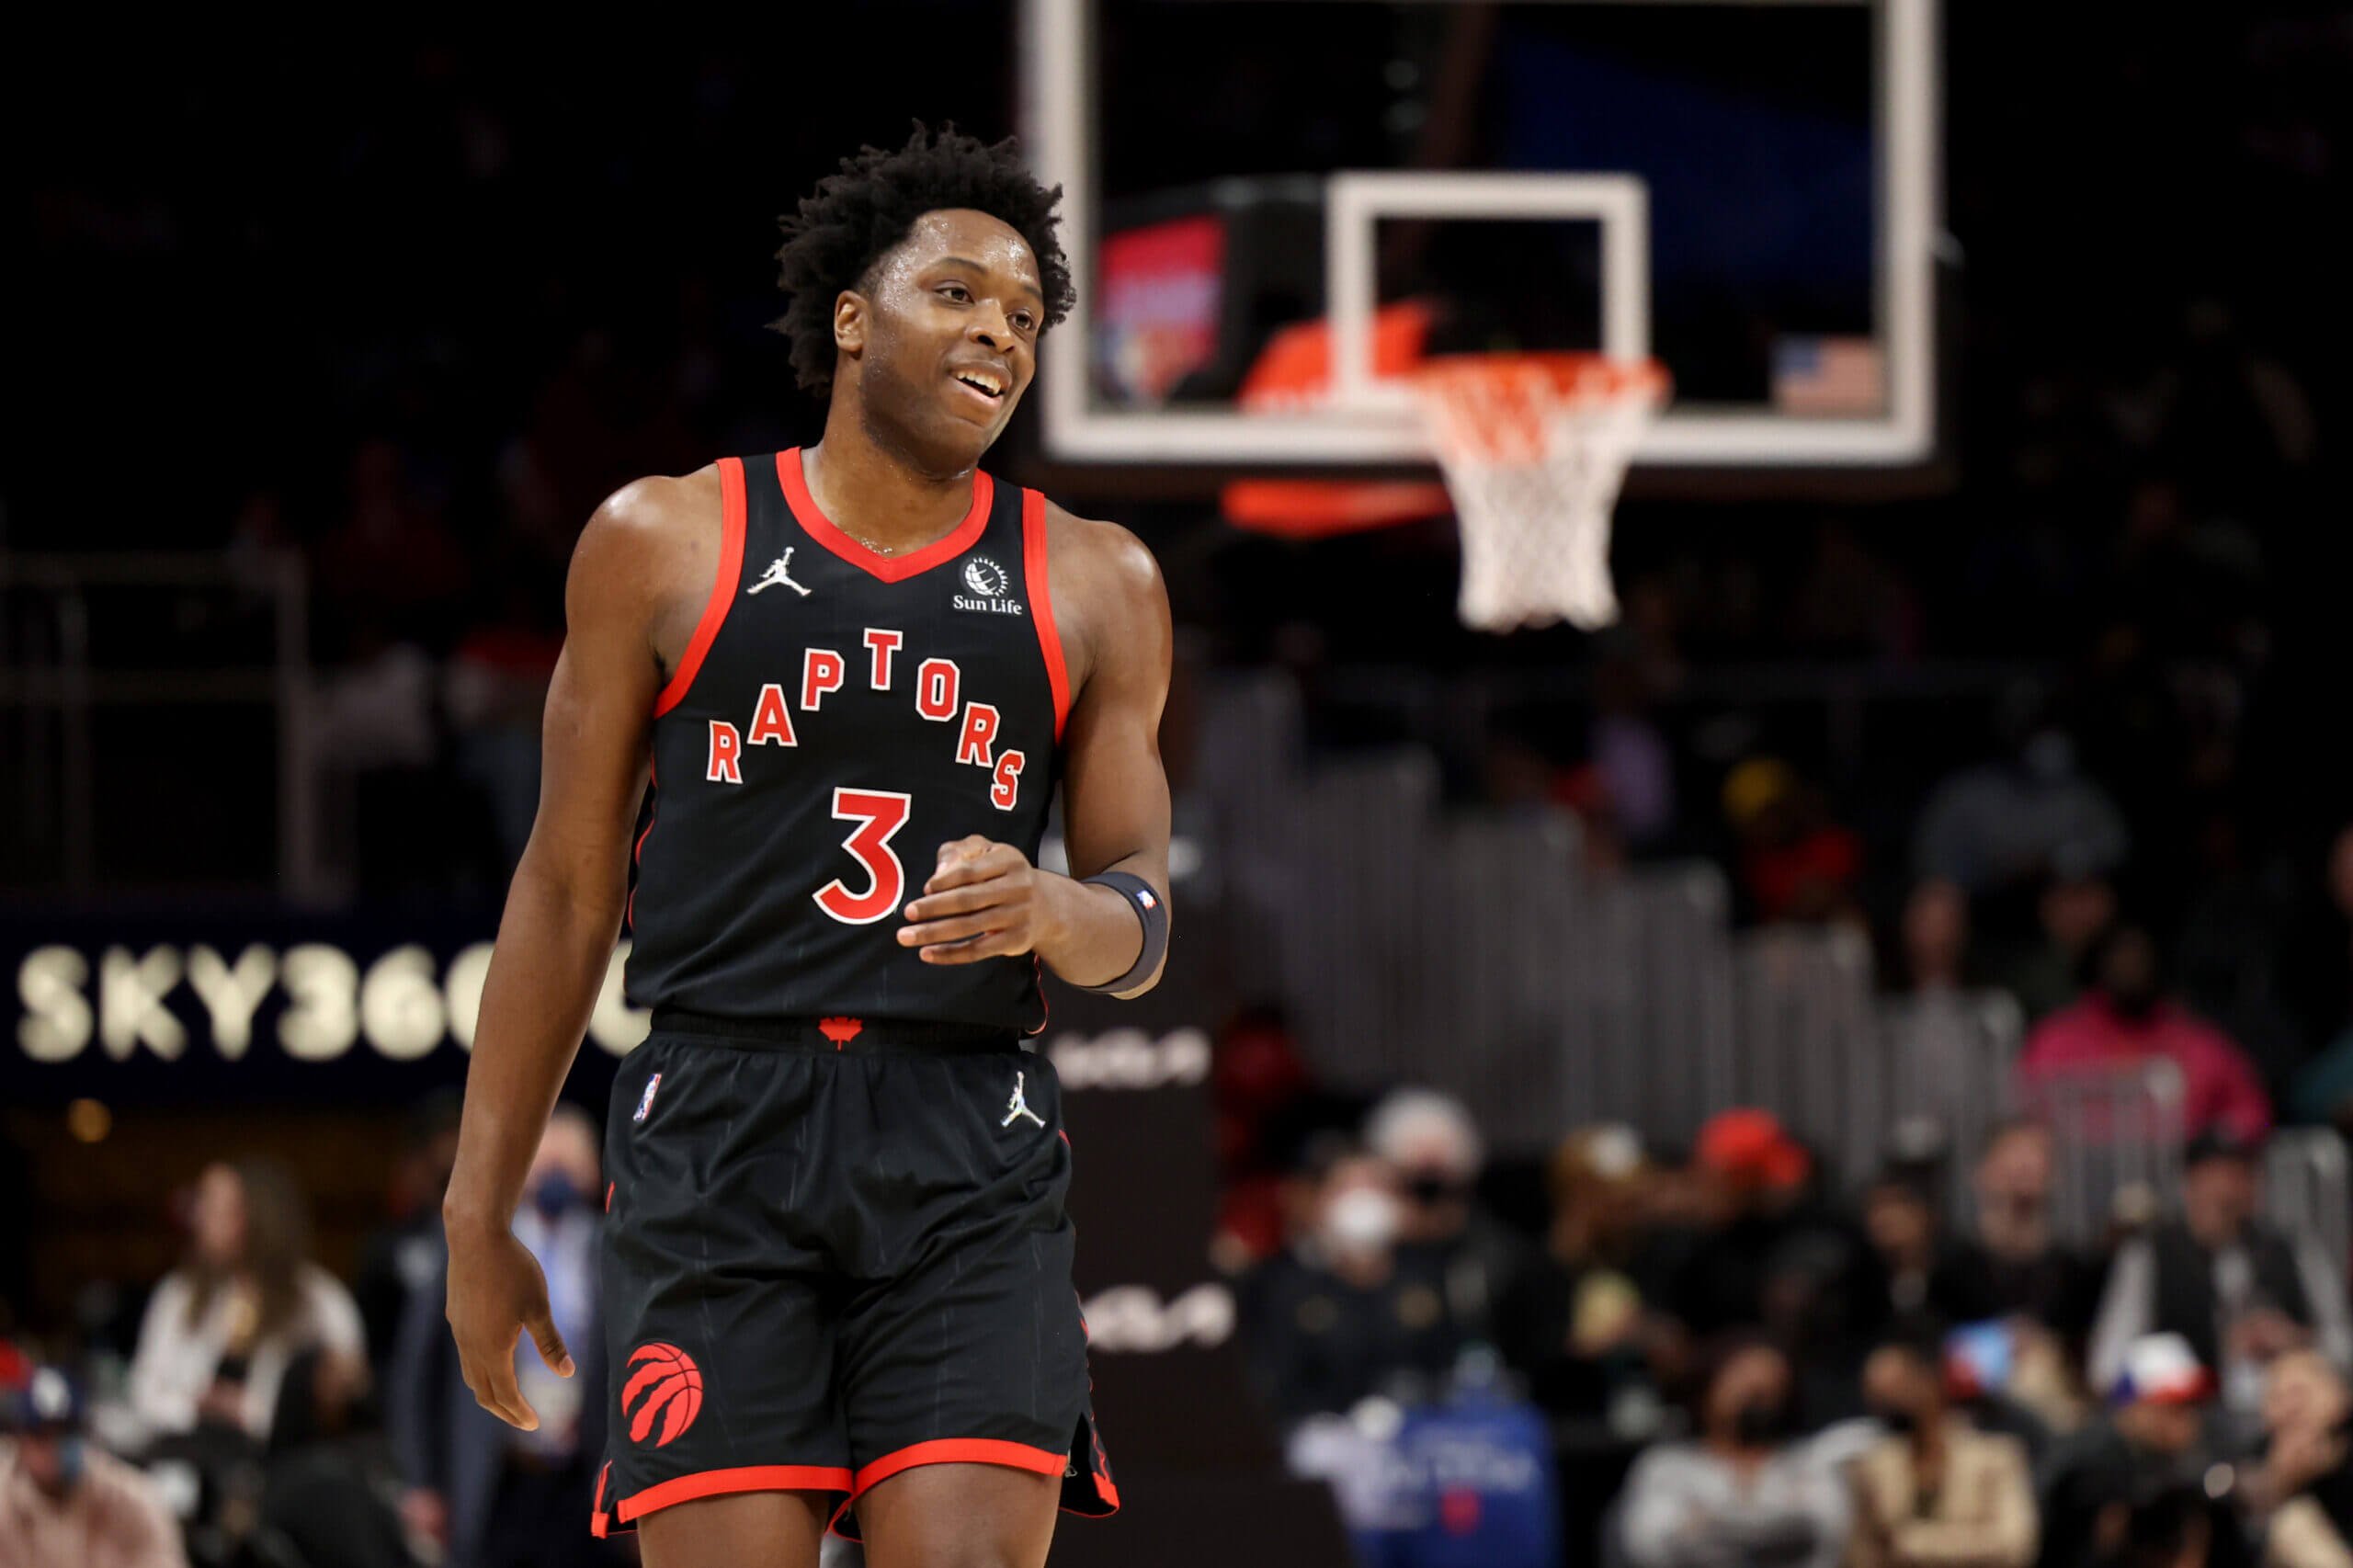  Memphis Grizzlies to Acquire OG Anunoby from the Toronto Raptors in Blockbuster Deal